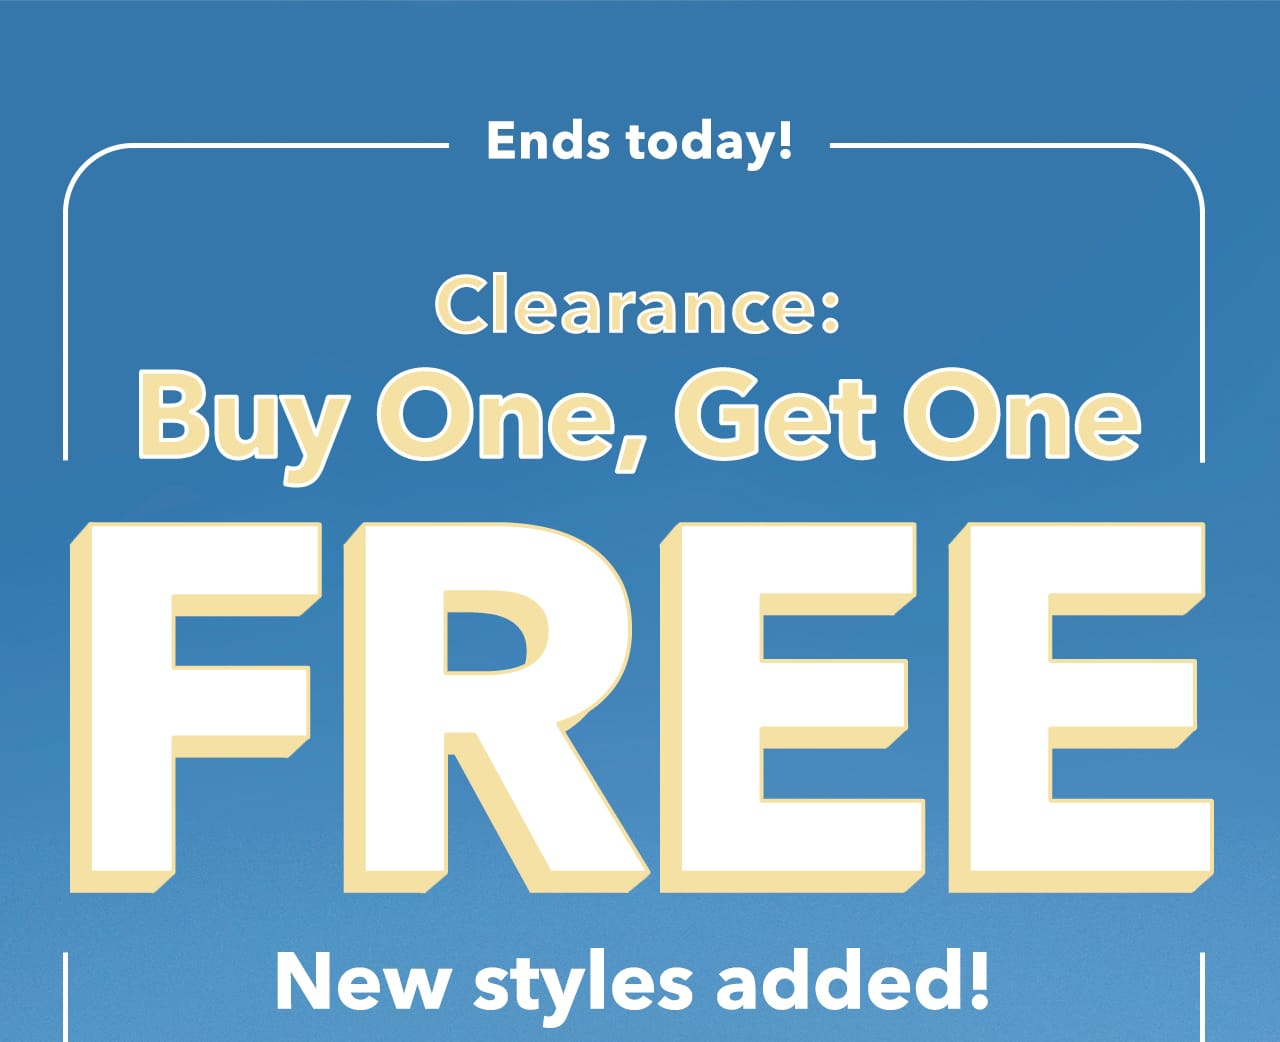 Ends today! Clearance: Buy One, Get One Free | New styles added! Ends today! Clearance: Buy One, Get One FREE New styles added! 